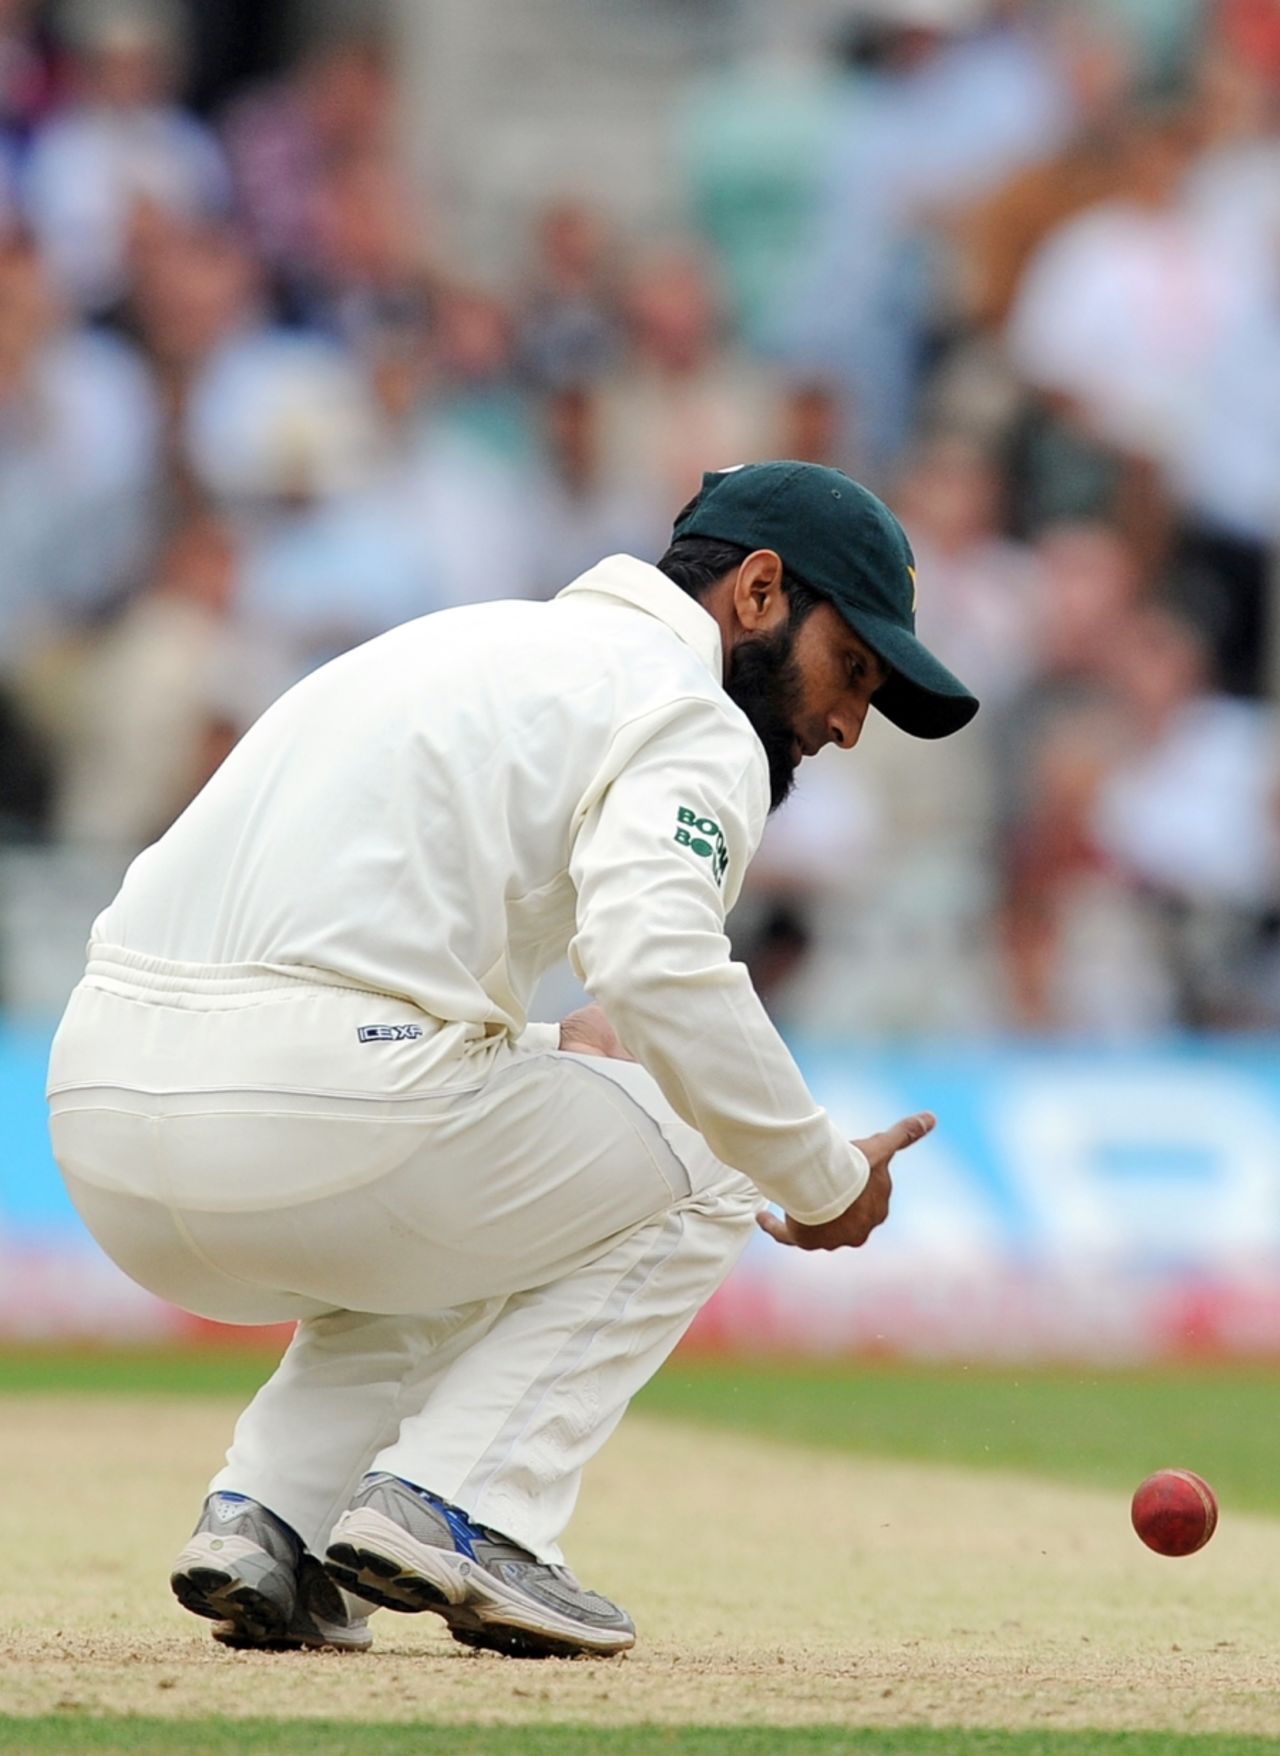 Mohammad Yousuf's return to international cricket didn't go quite as planned as he dropped an easy catch off Saeed Ajmal, England v Pakistan, 3rd Test, The Oval, August 18, 2010